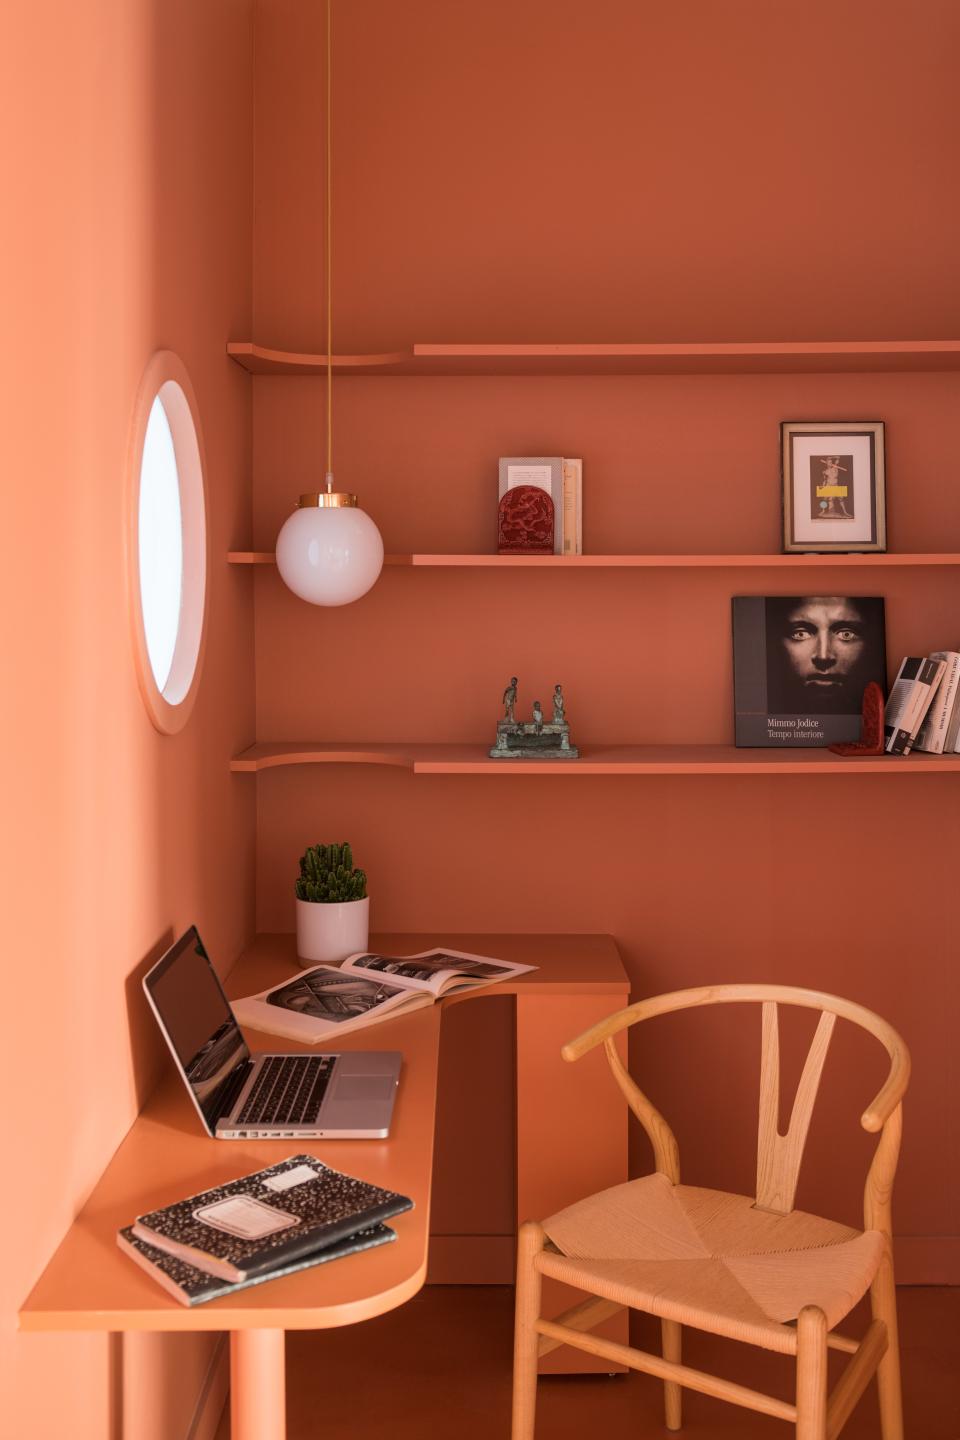 The original layout intended this small space to be the dining area, but CaSA thought it was too dark and cramped to work. So they made it into the “studio,” complete with a bespoke desk and a porthole window that brings in light from the master bedroom.